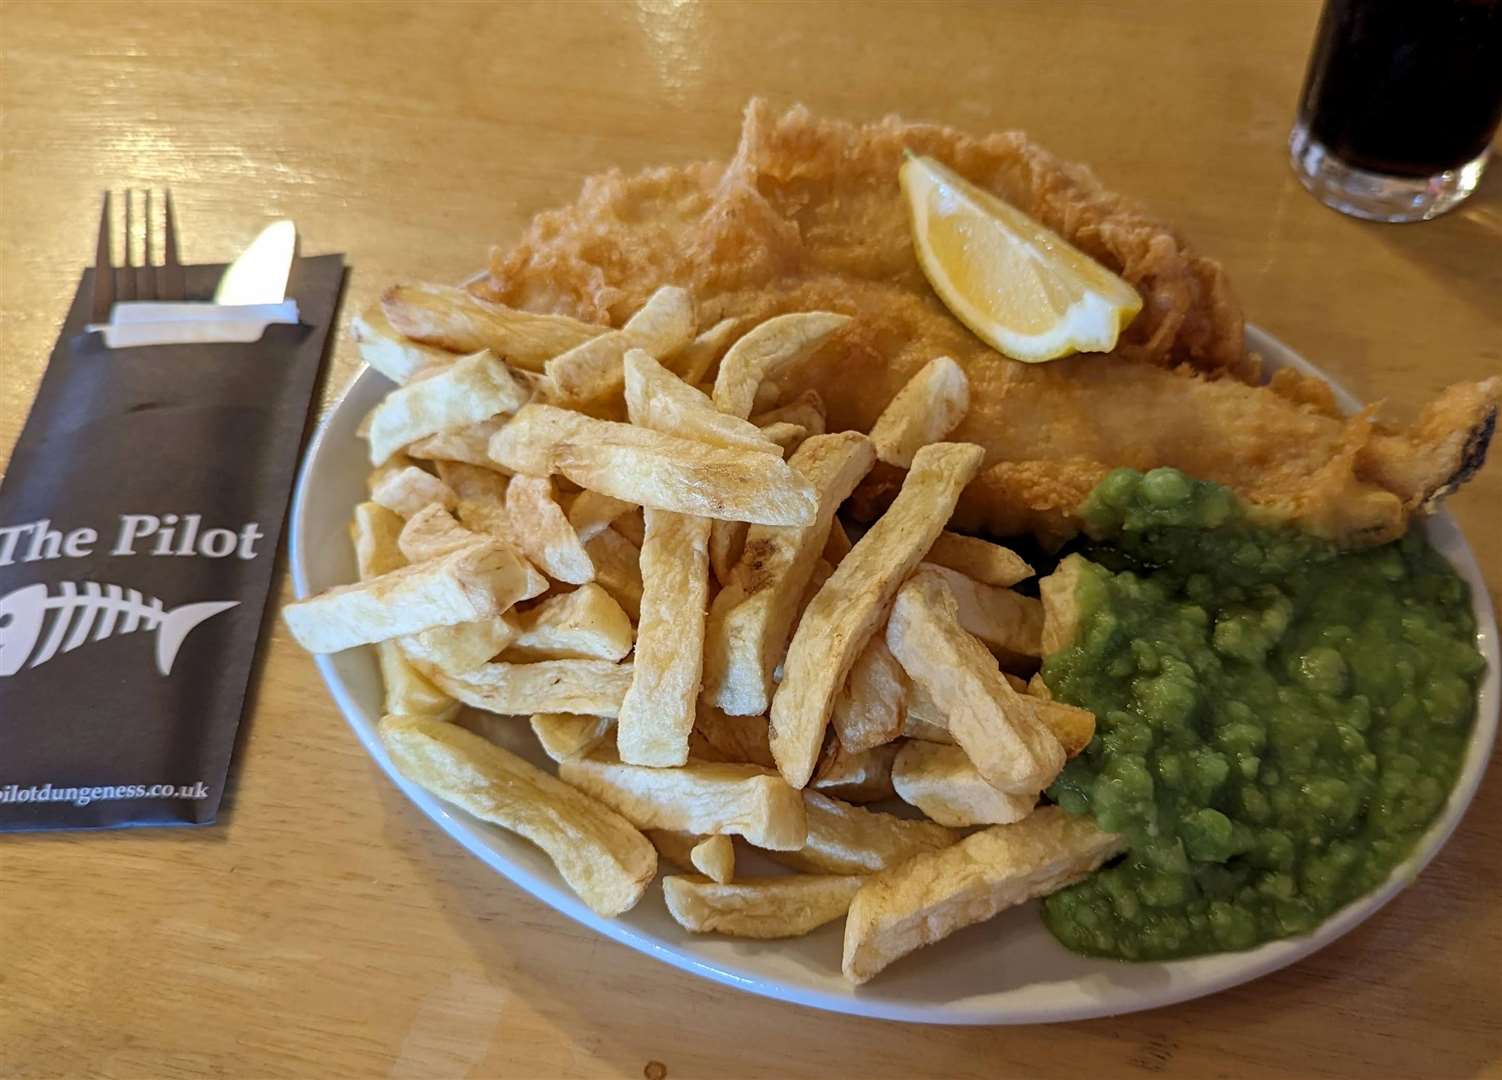 A medium portion of cod and chips – which is still straining at the edges of the plate